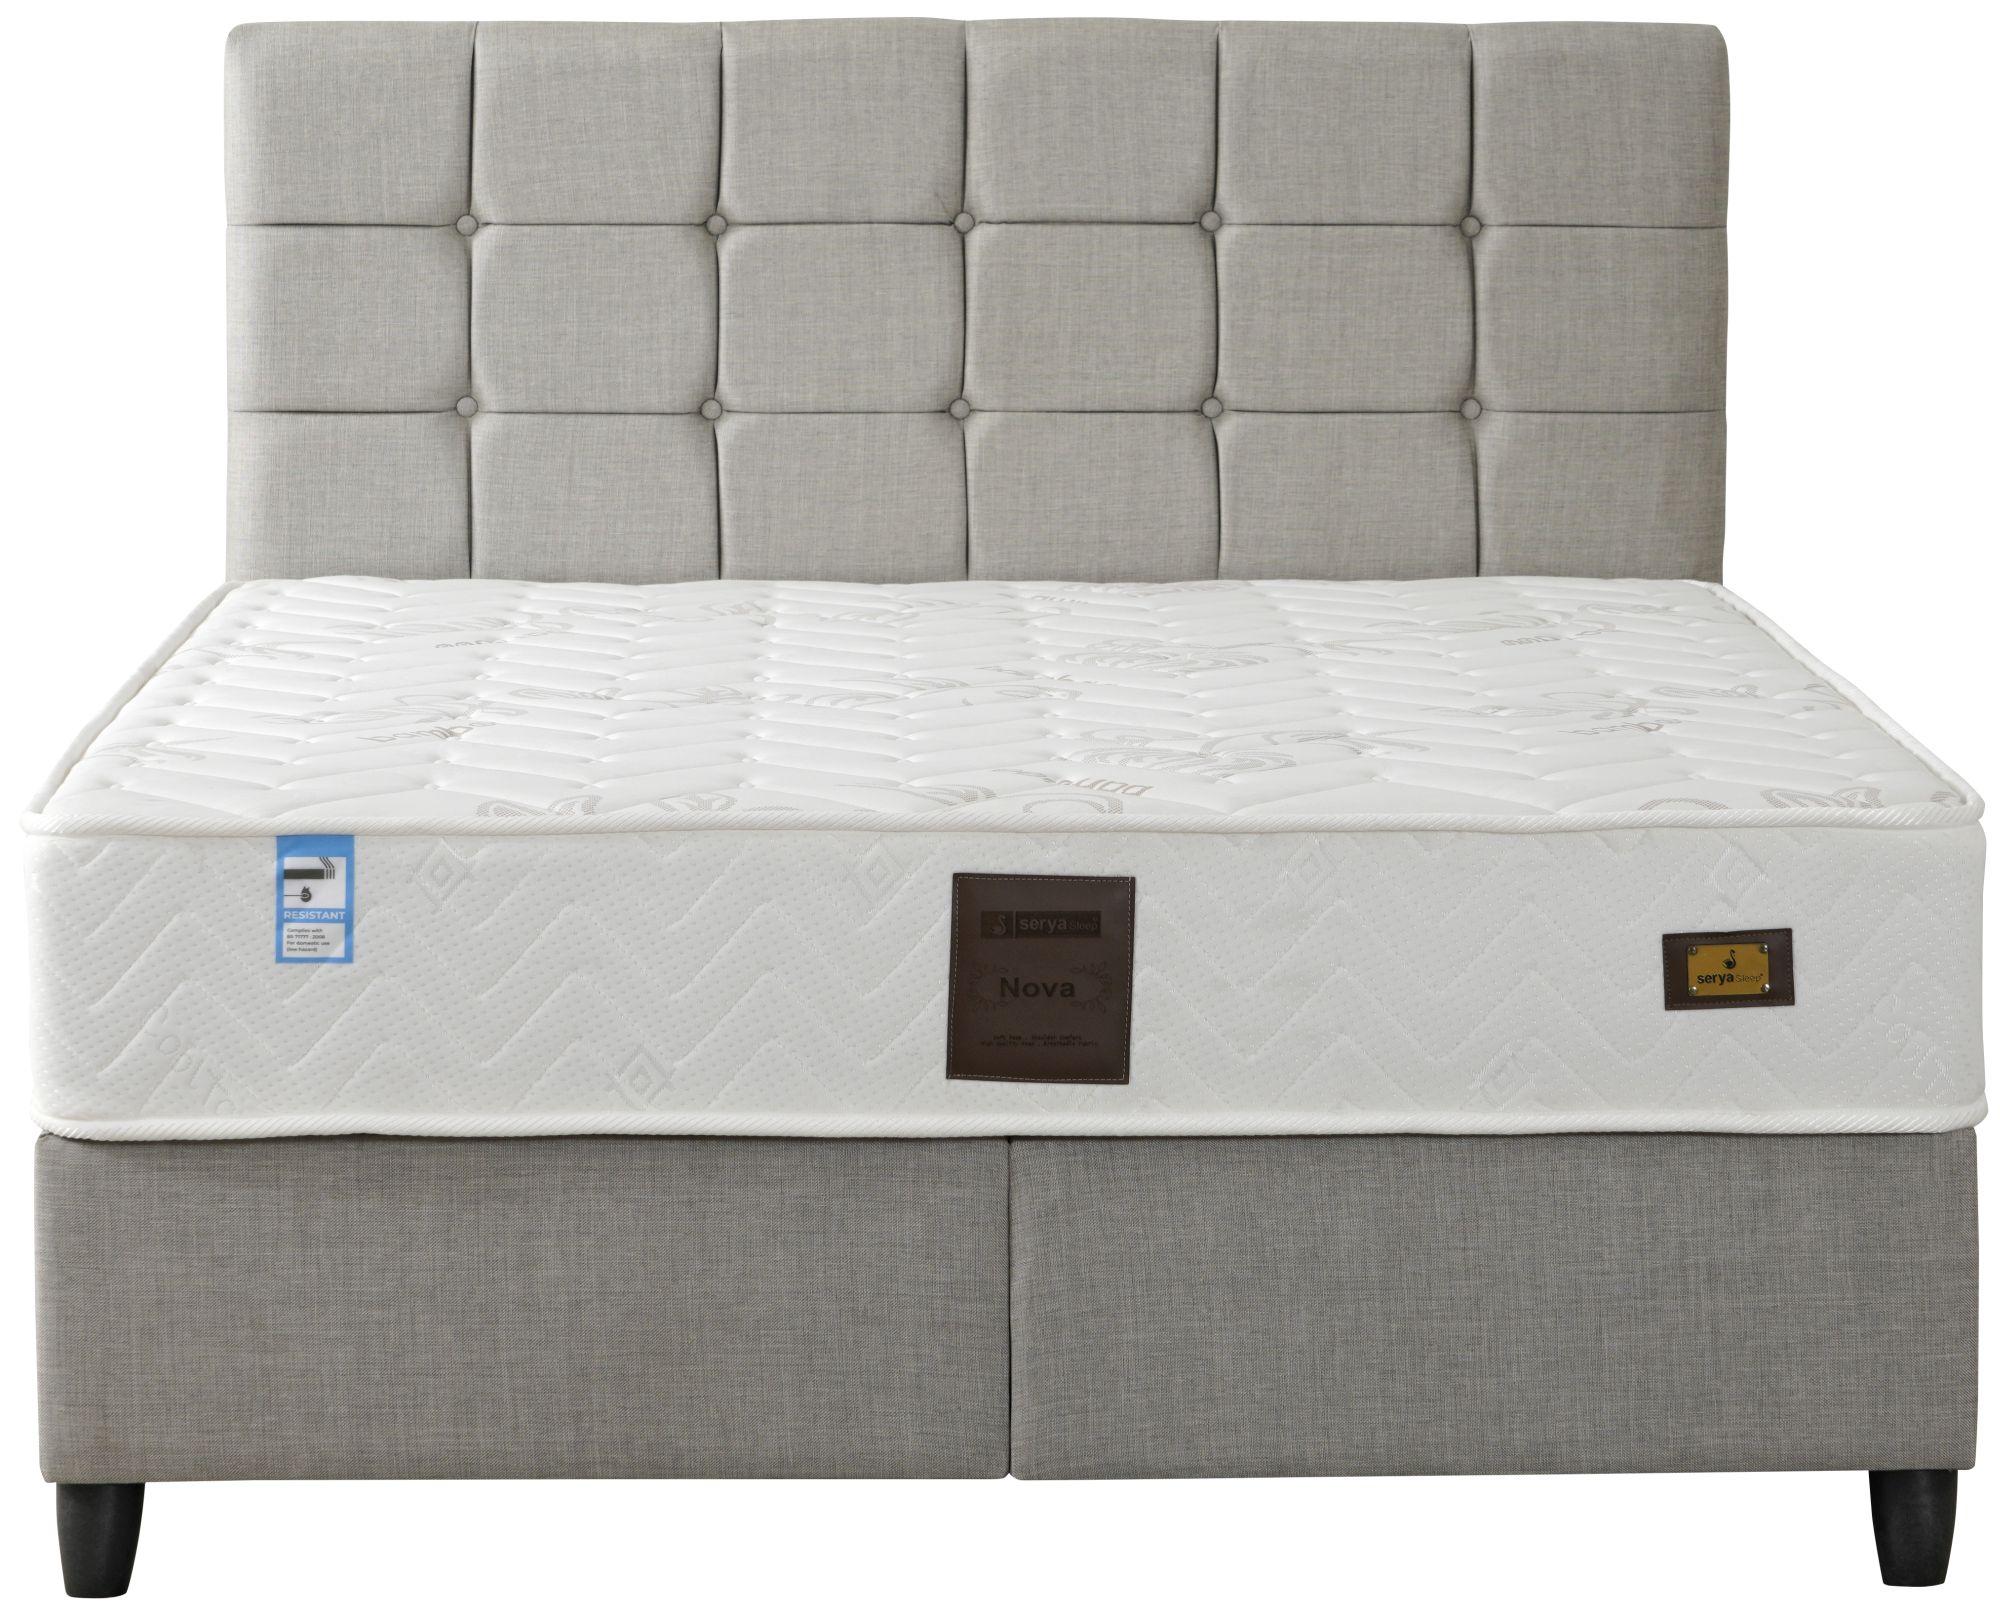 Francesca Grey Fabric Upholstered Ottoman Storage Bed - Comes in Single, Double and King Size